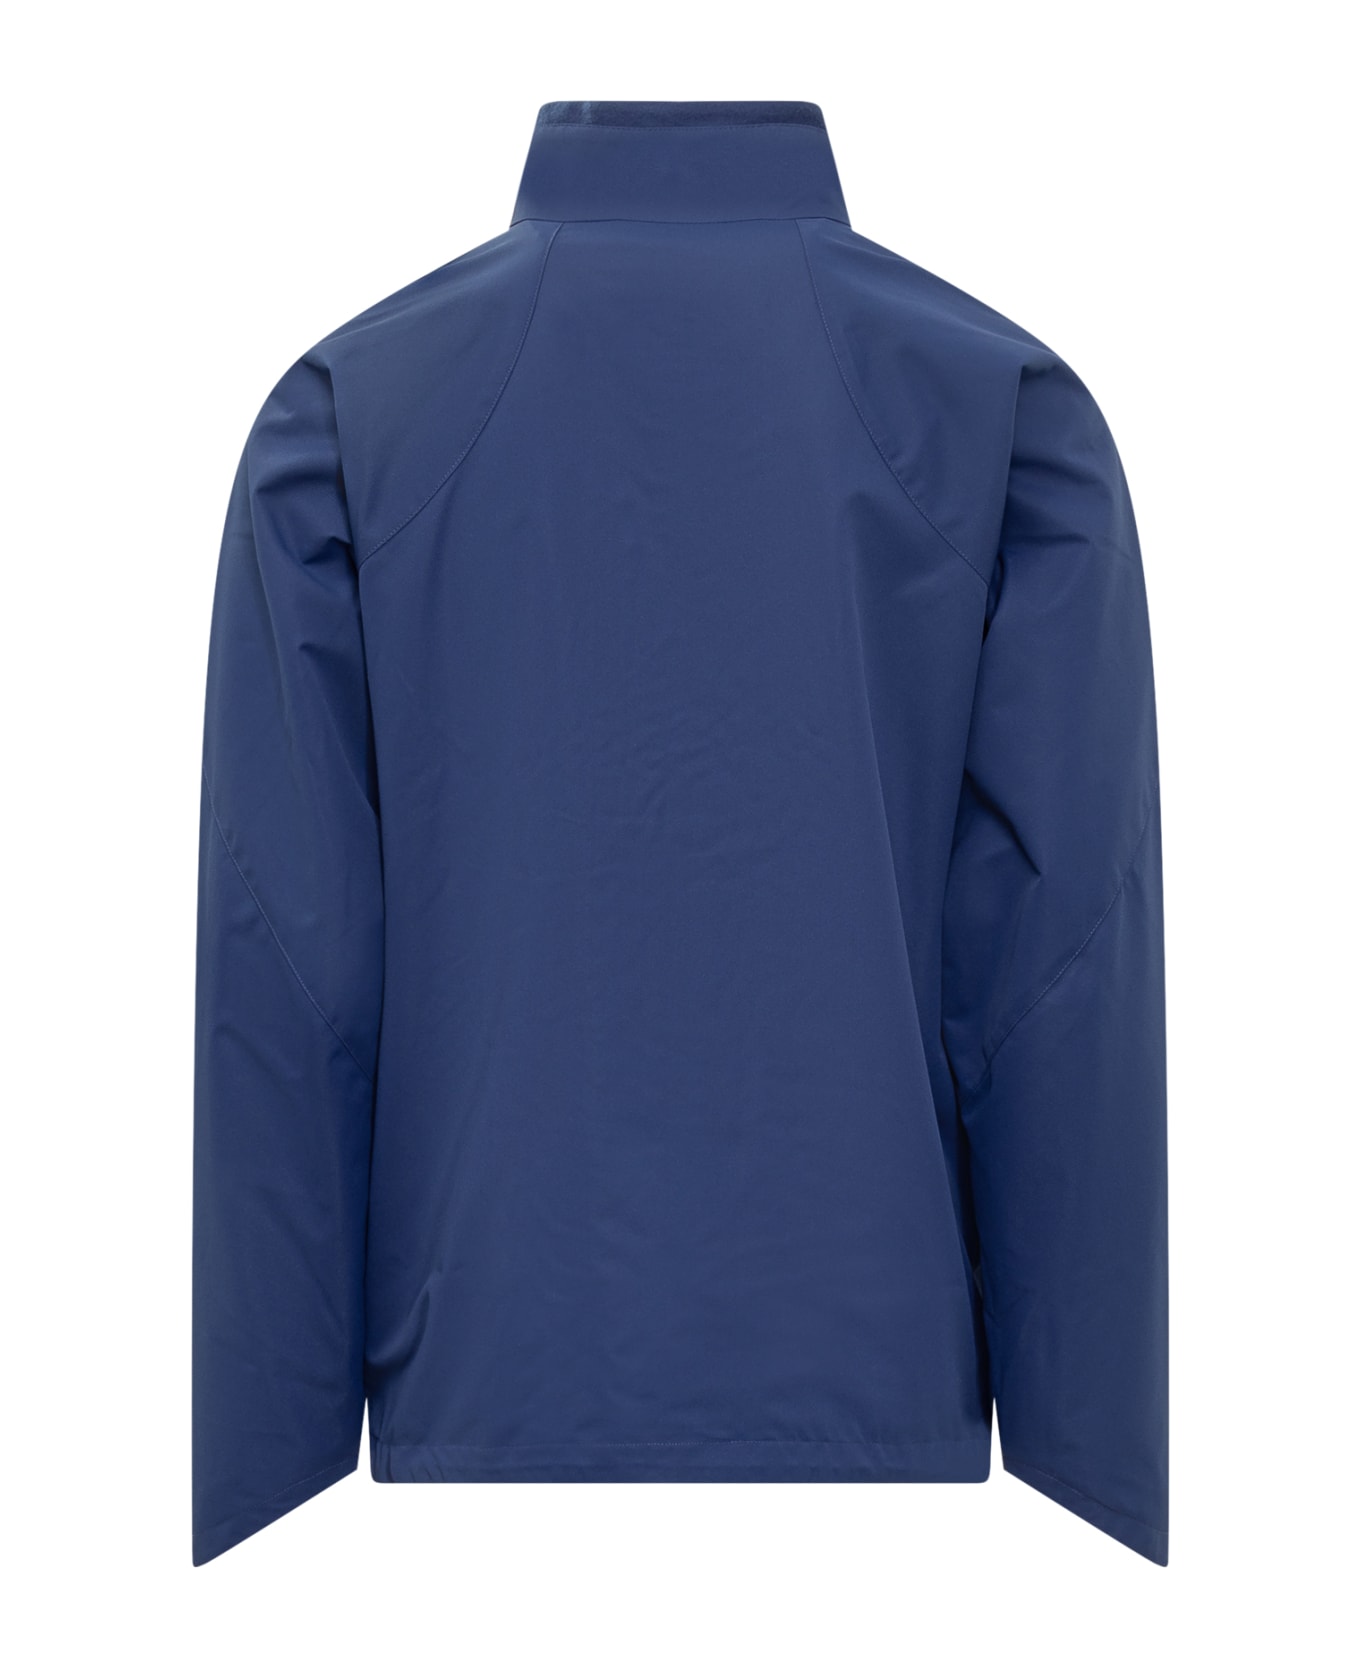 J.W. Anderson Puller Track Jacket - Airforce blue